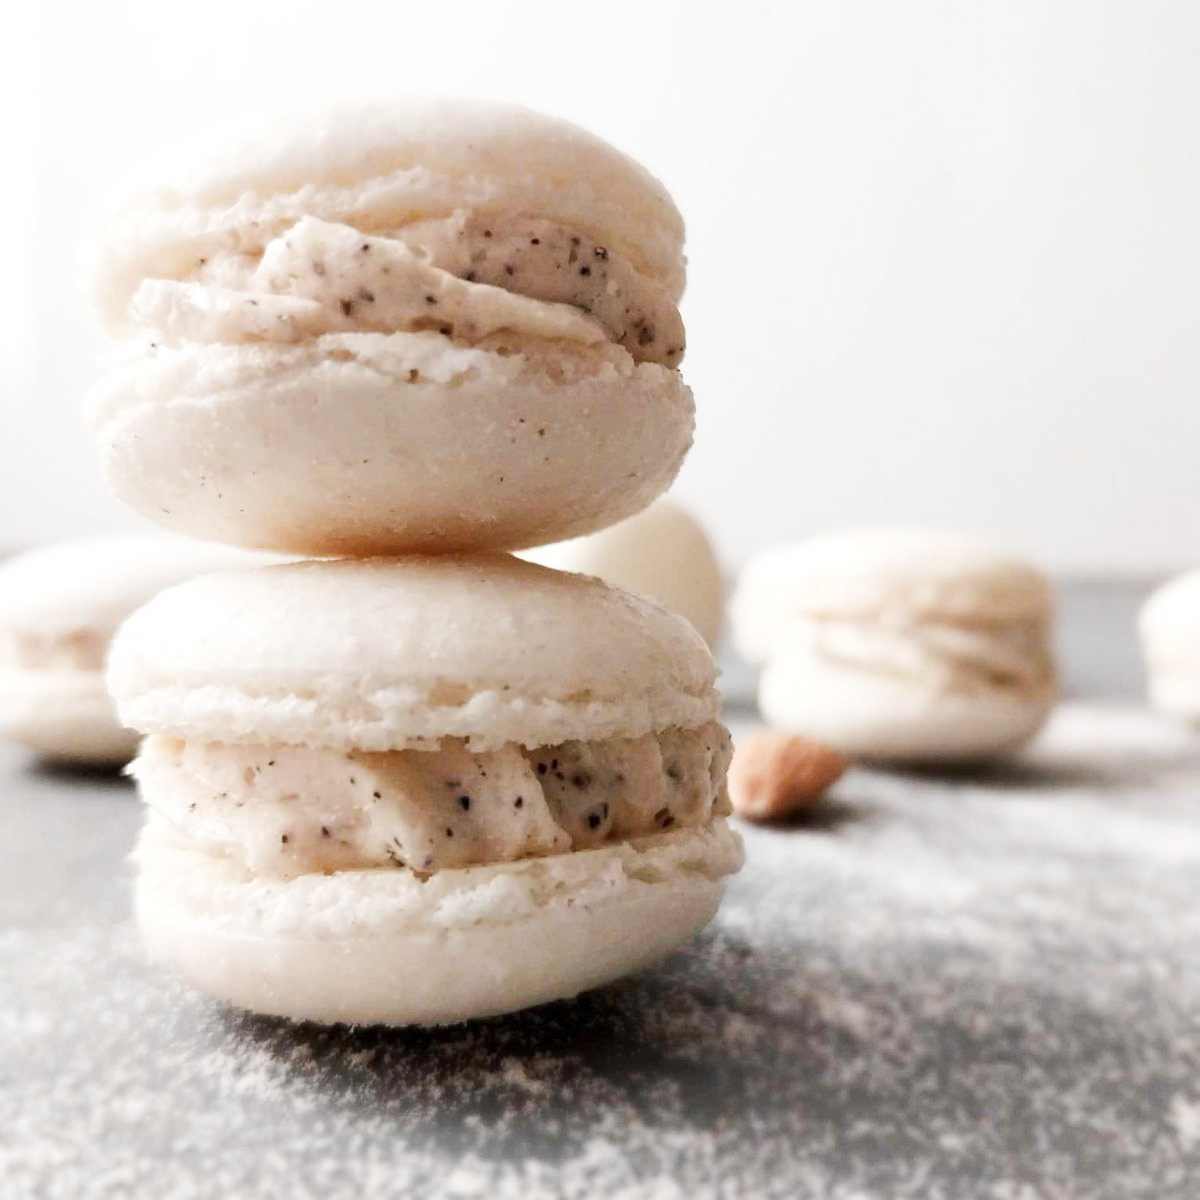 Coconut flour macarons stacked on top of each other with buttercream filling.